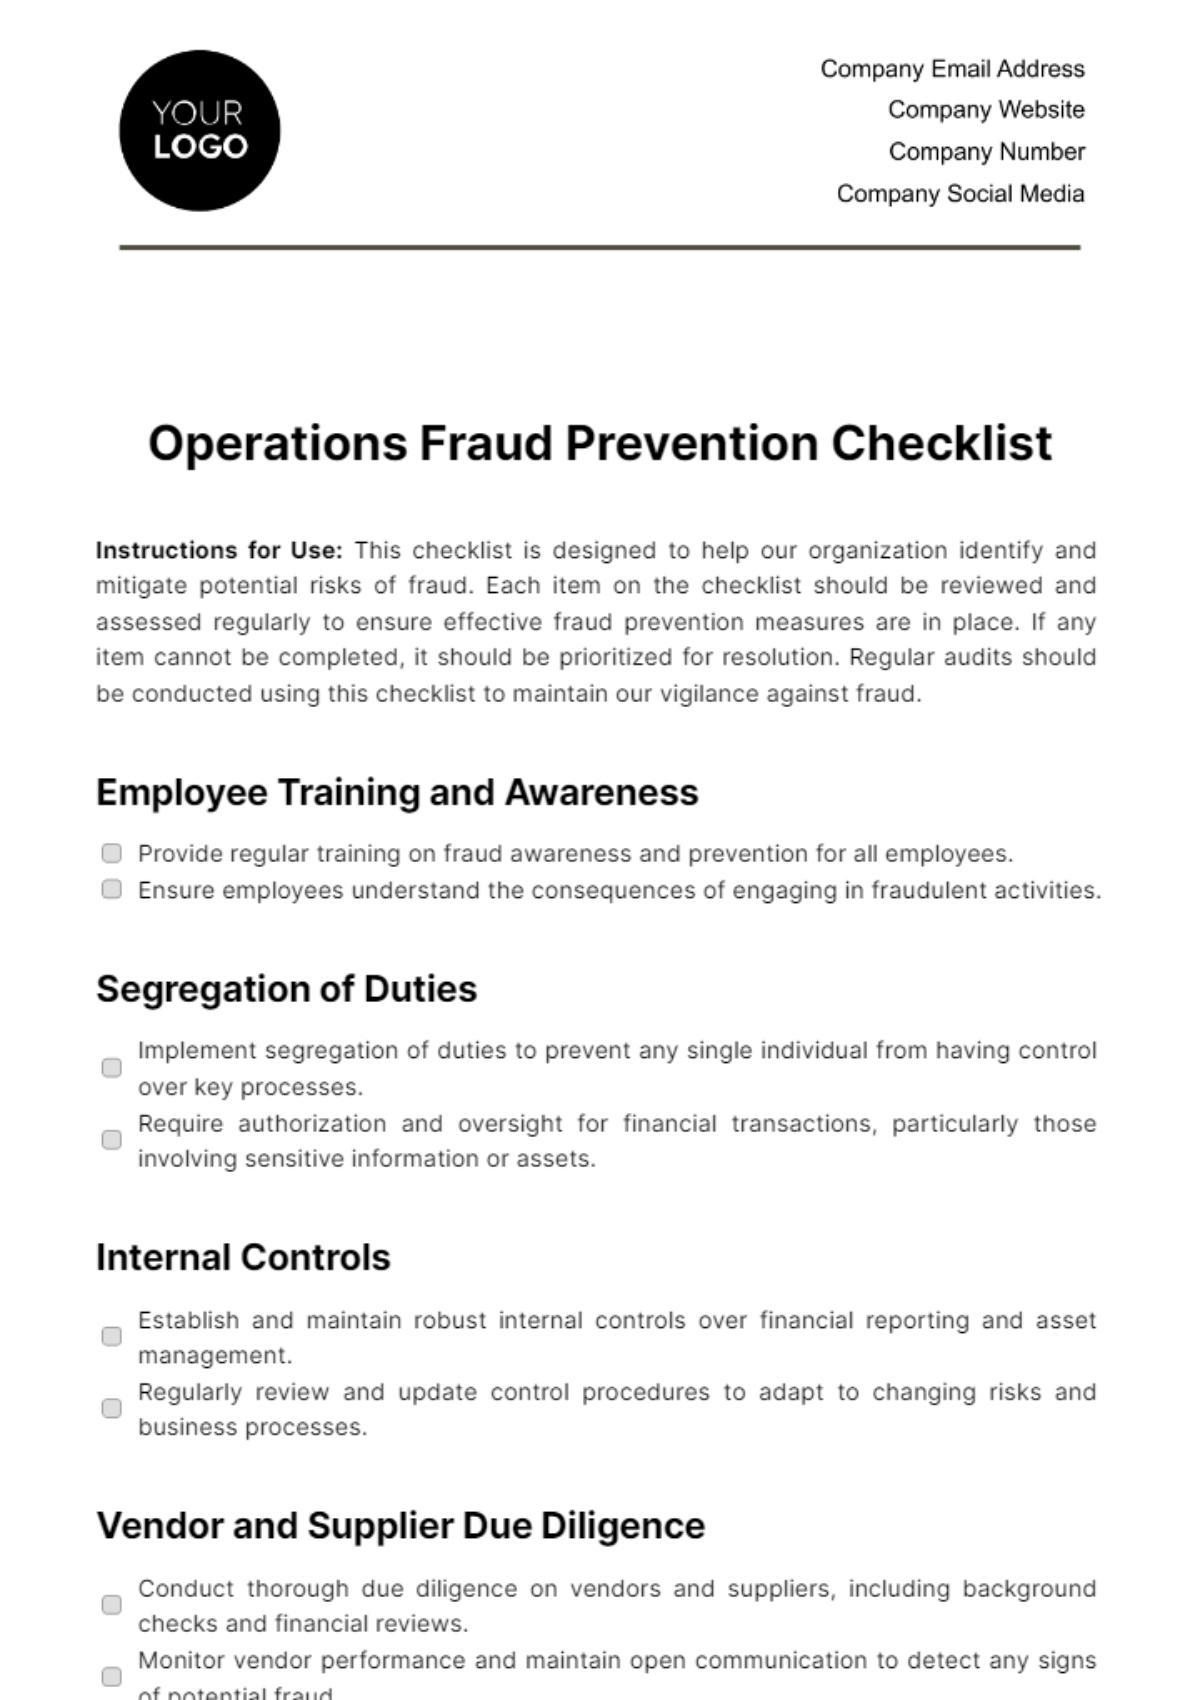 Operations Fraud Prevention Checklist Template